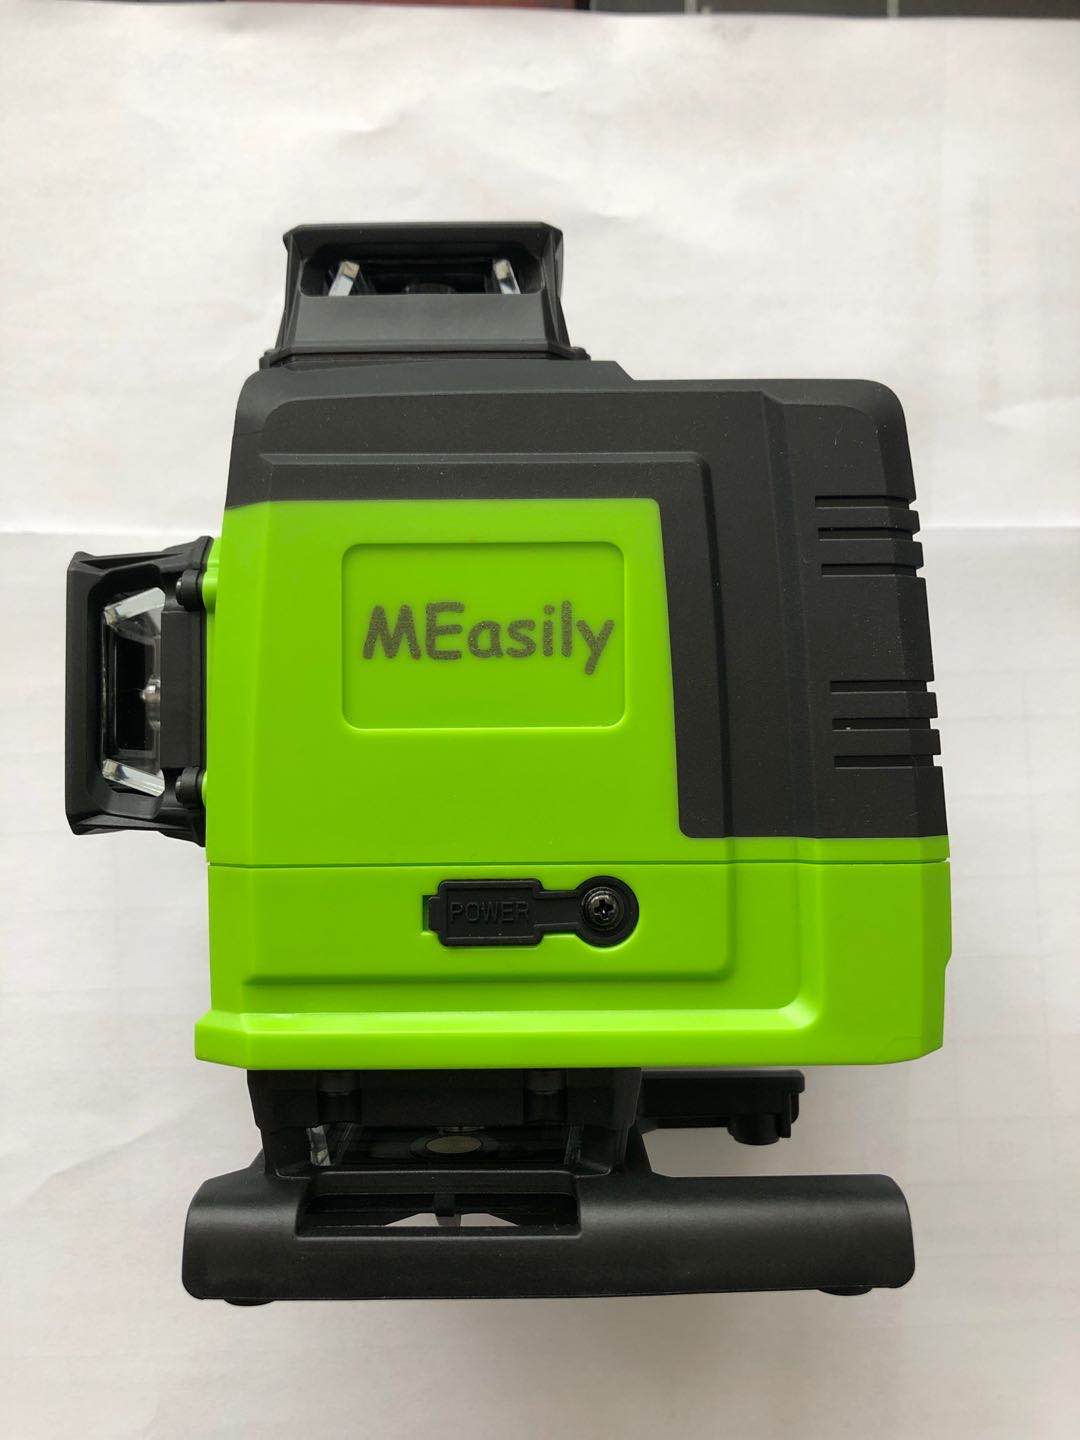 MEasily elf-Leveling 360-Degree Cross Line Laser Level with Pulse Mode - Glow Guards